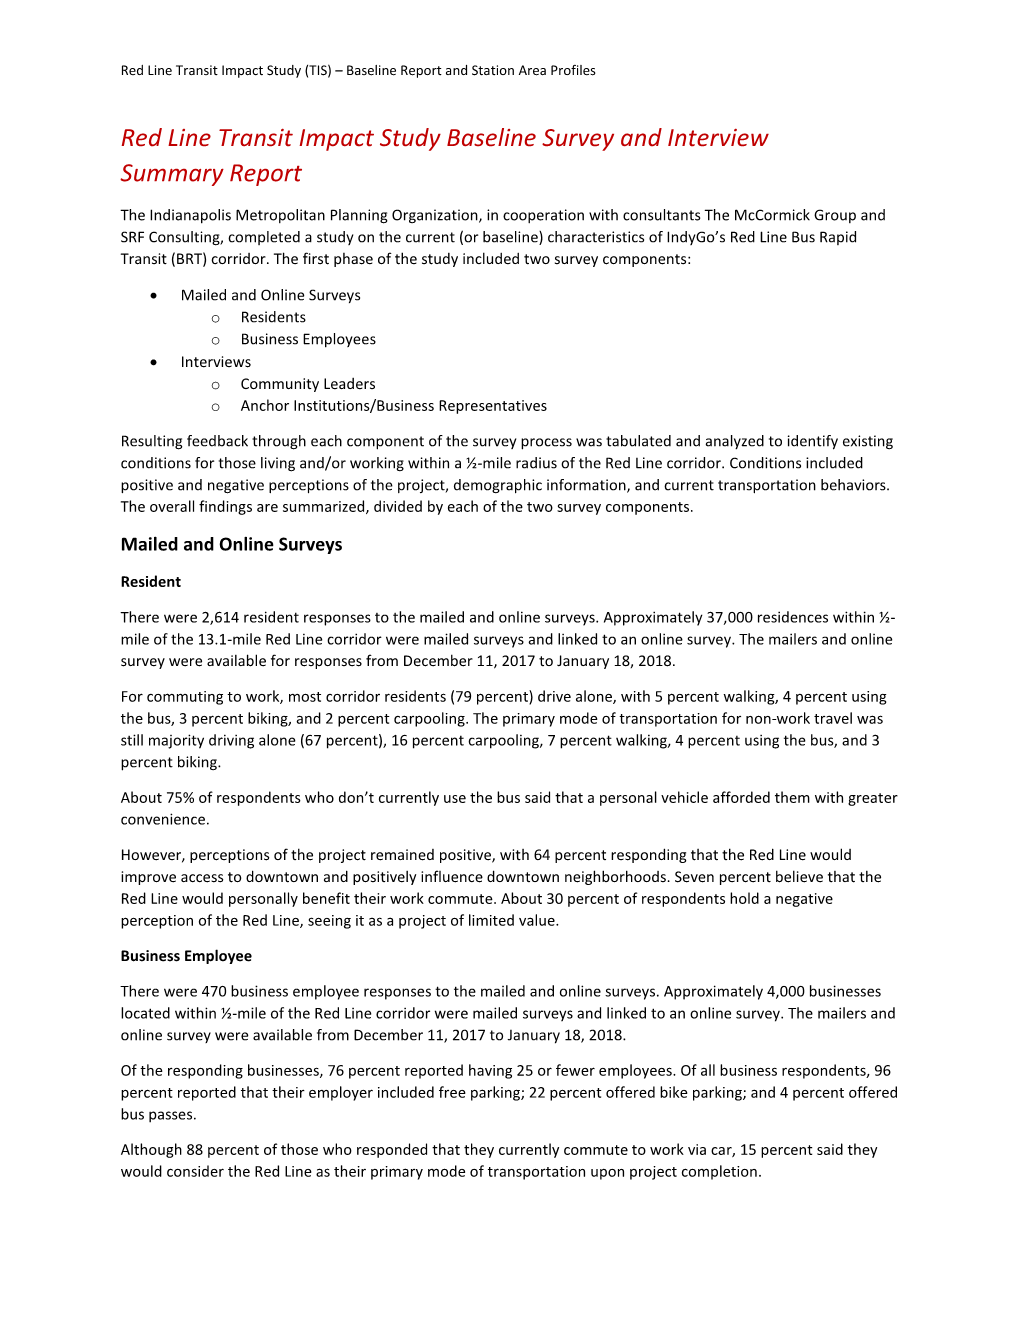 Red Line Transit Impact Study Baseline Survey and Interview Summary Report